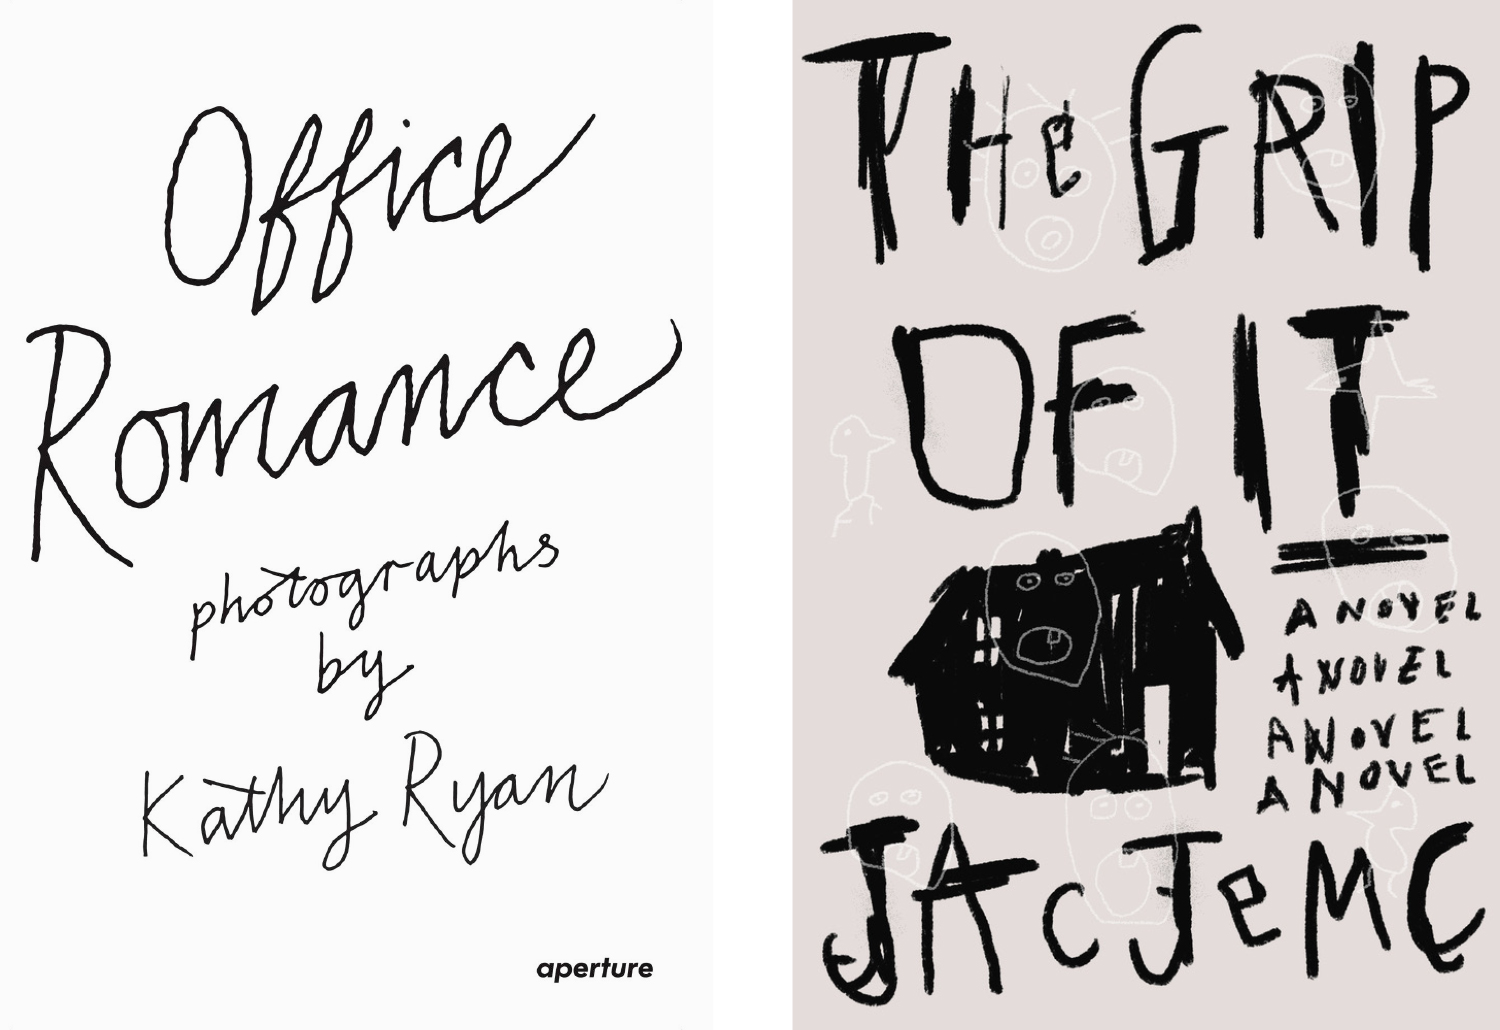 Office Romance and The Grip of It covers